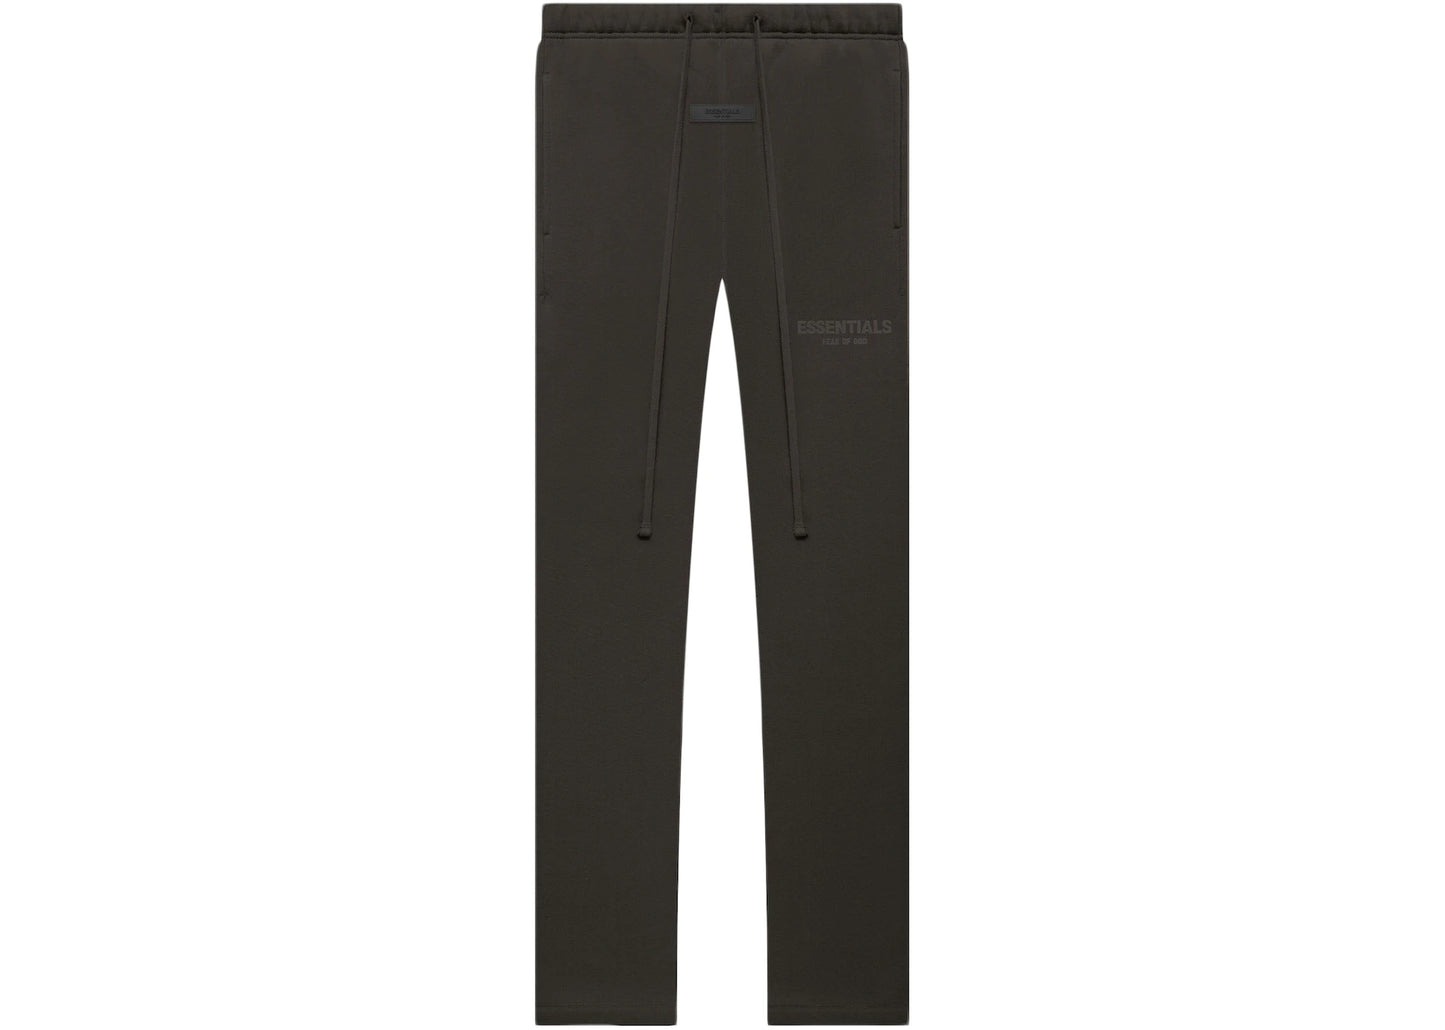 Fear of God Essentials Relaxed Sweatpant Off Black